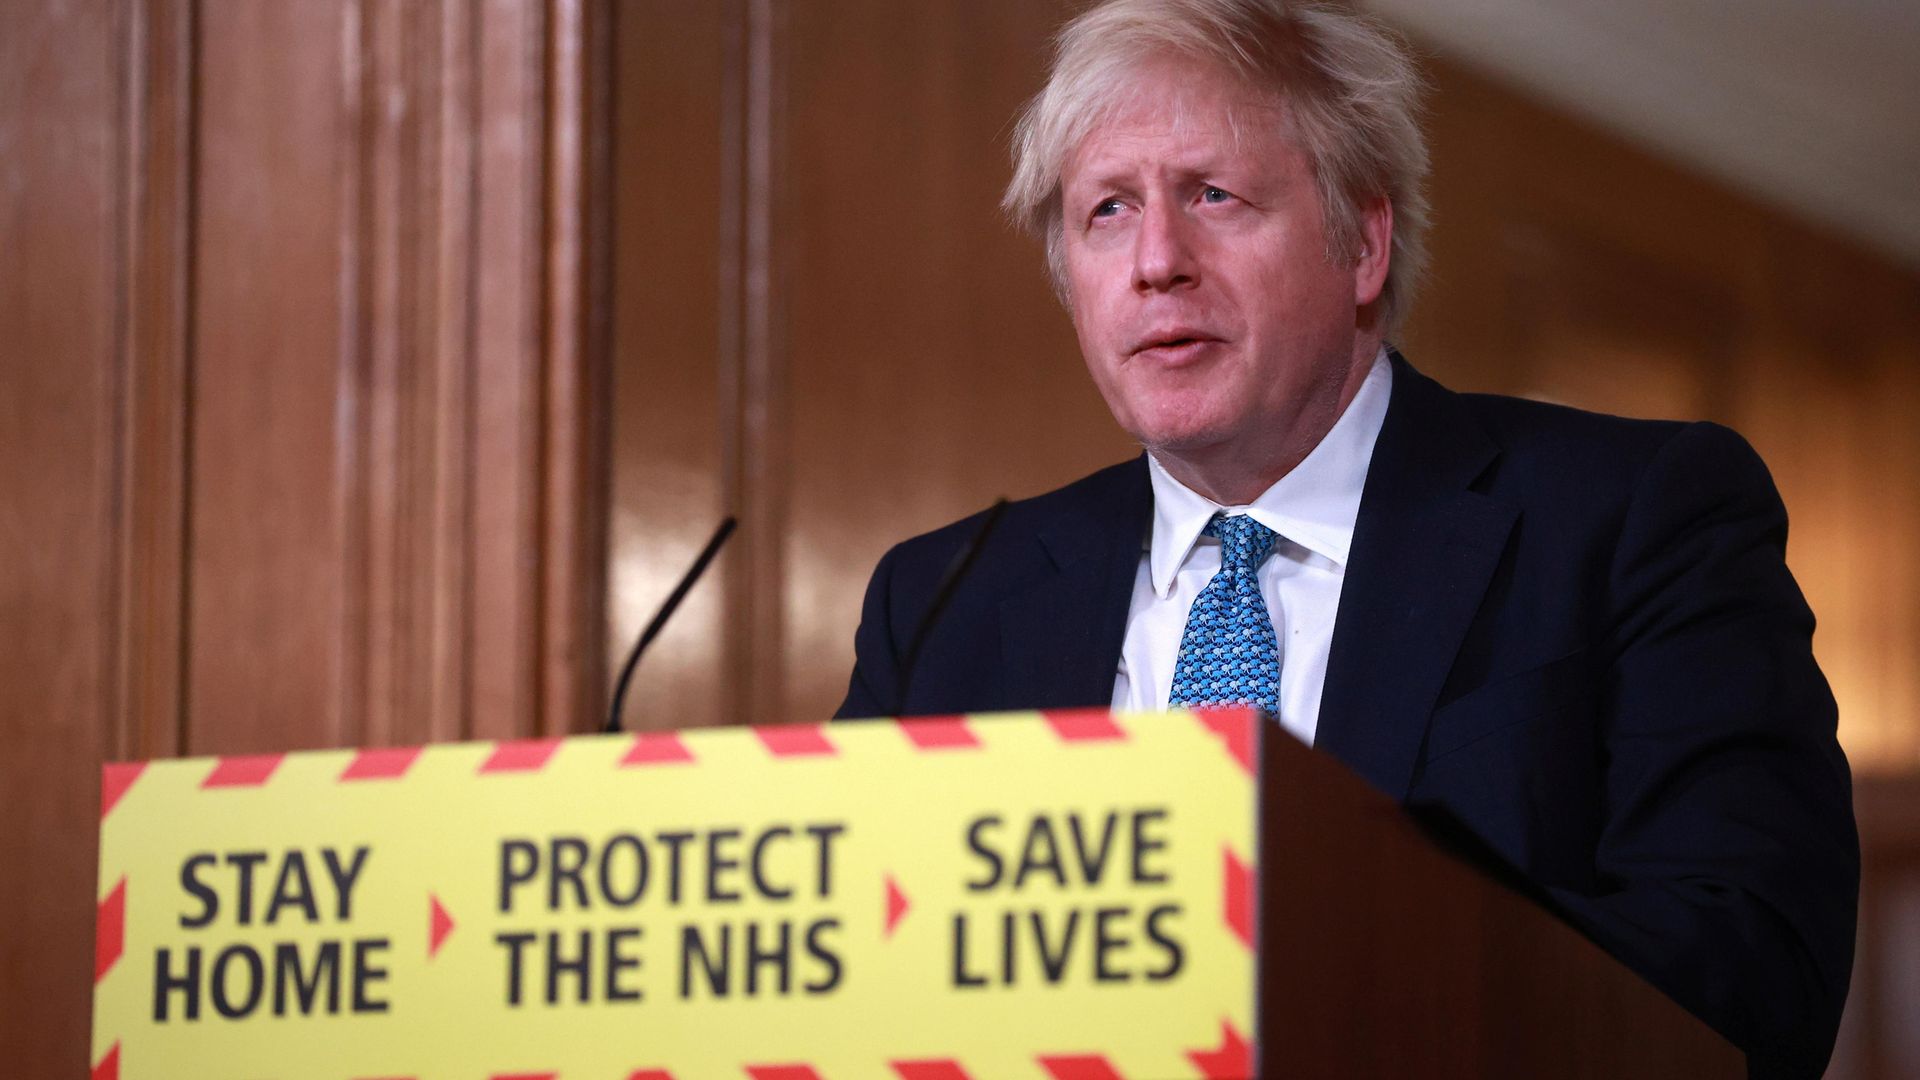 Prime Minister Boris Johnson during a media briefing on coronavirus (COVID-19) in Downing Street, London. - Credit: PA